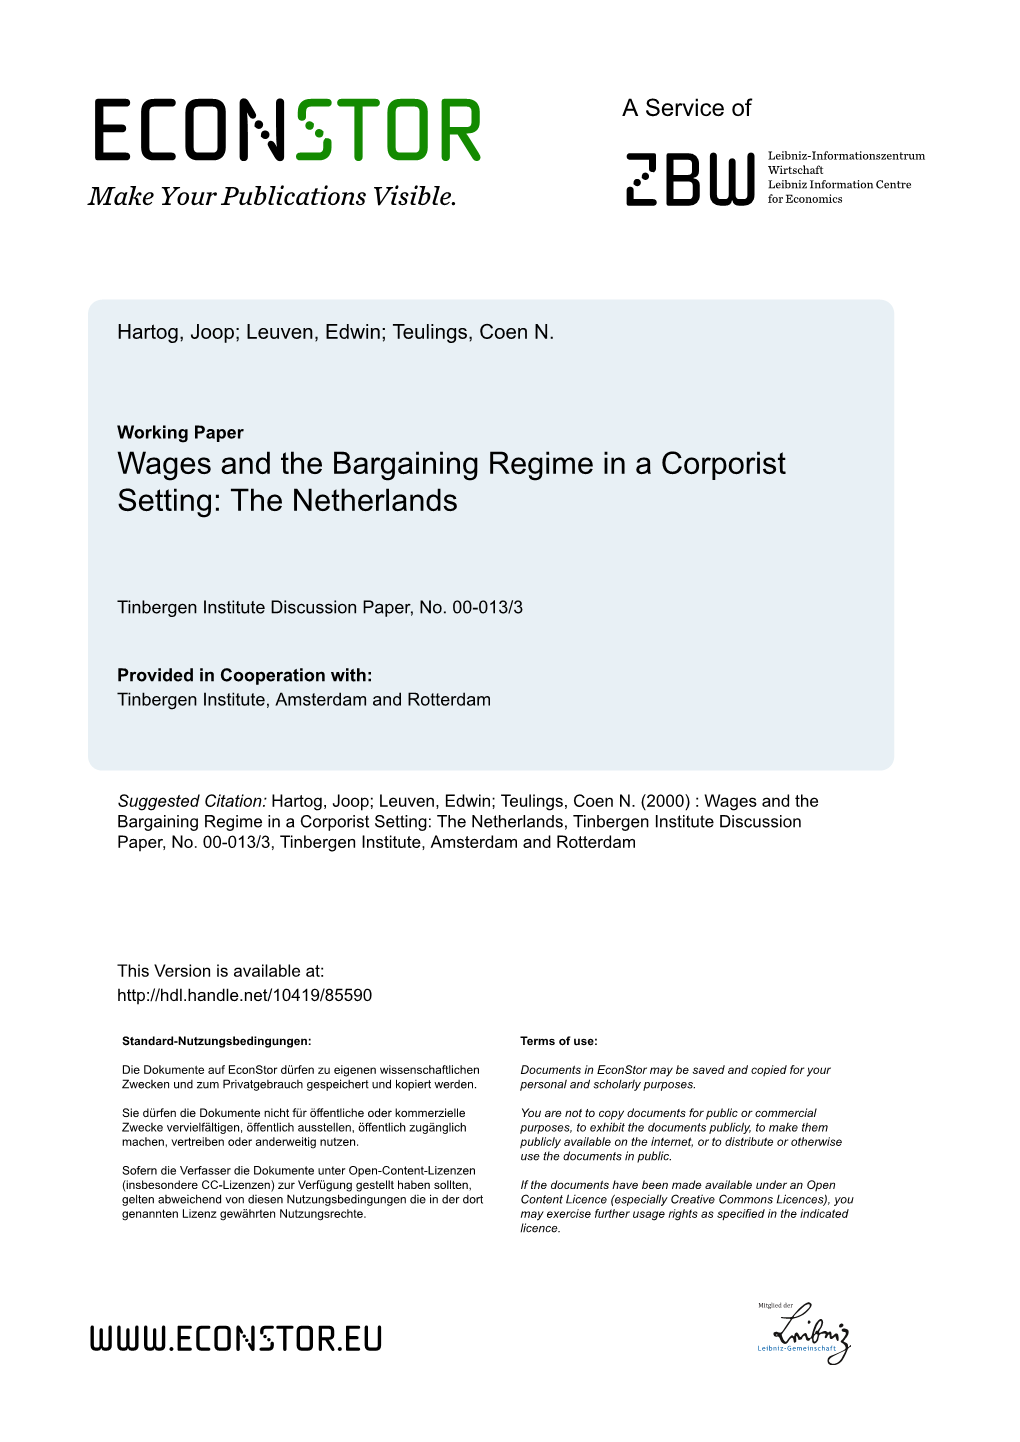 Wages and the Bargaining Regime in a Corporist Setting: the Netherlands